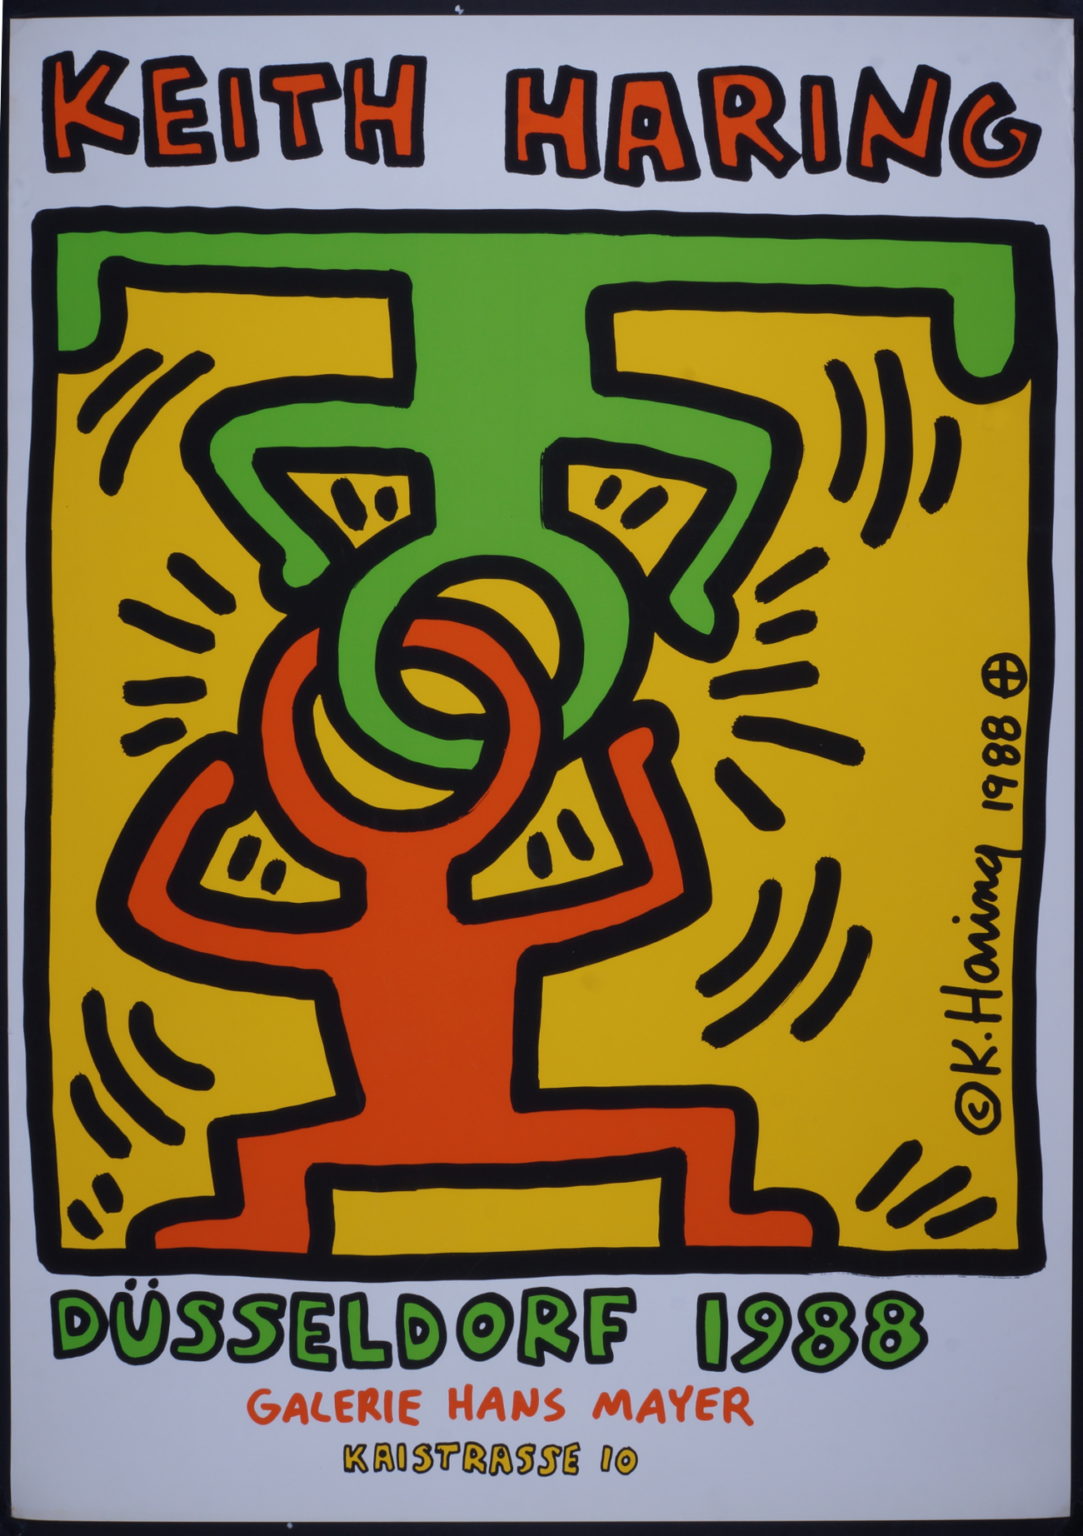 ncag art gallery HARING Keith UGS A_119